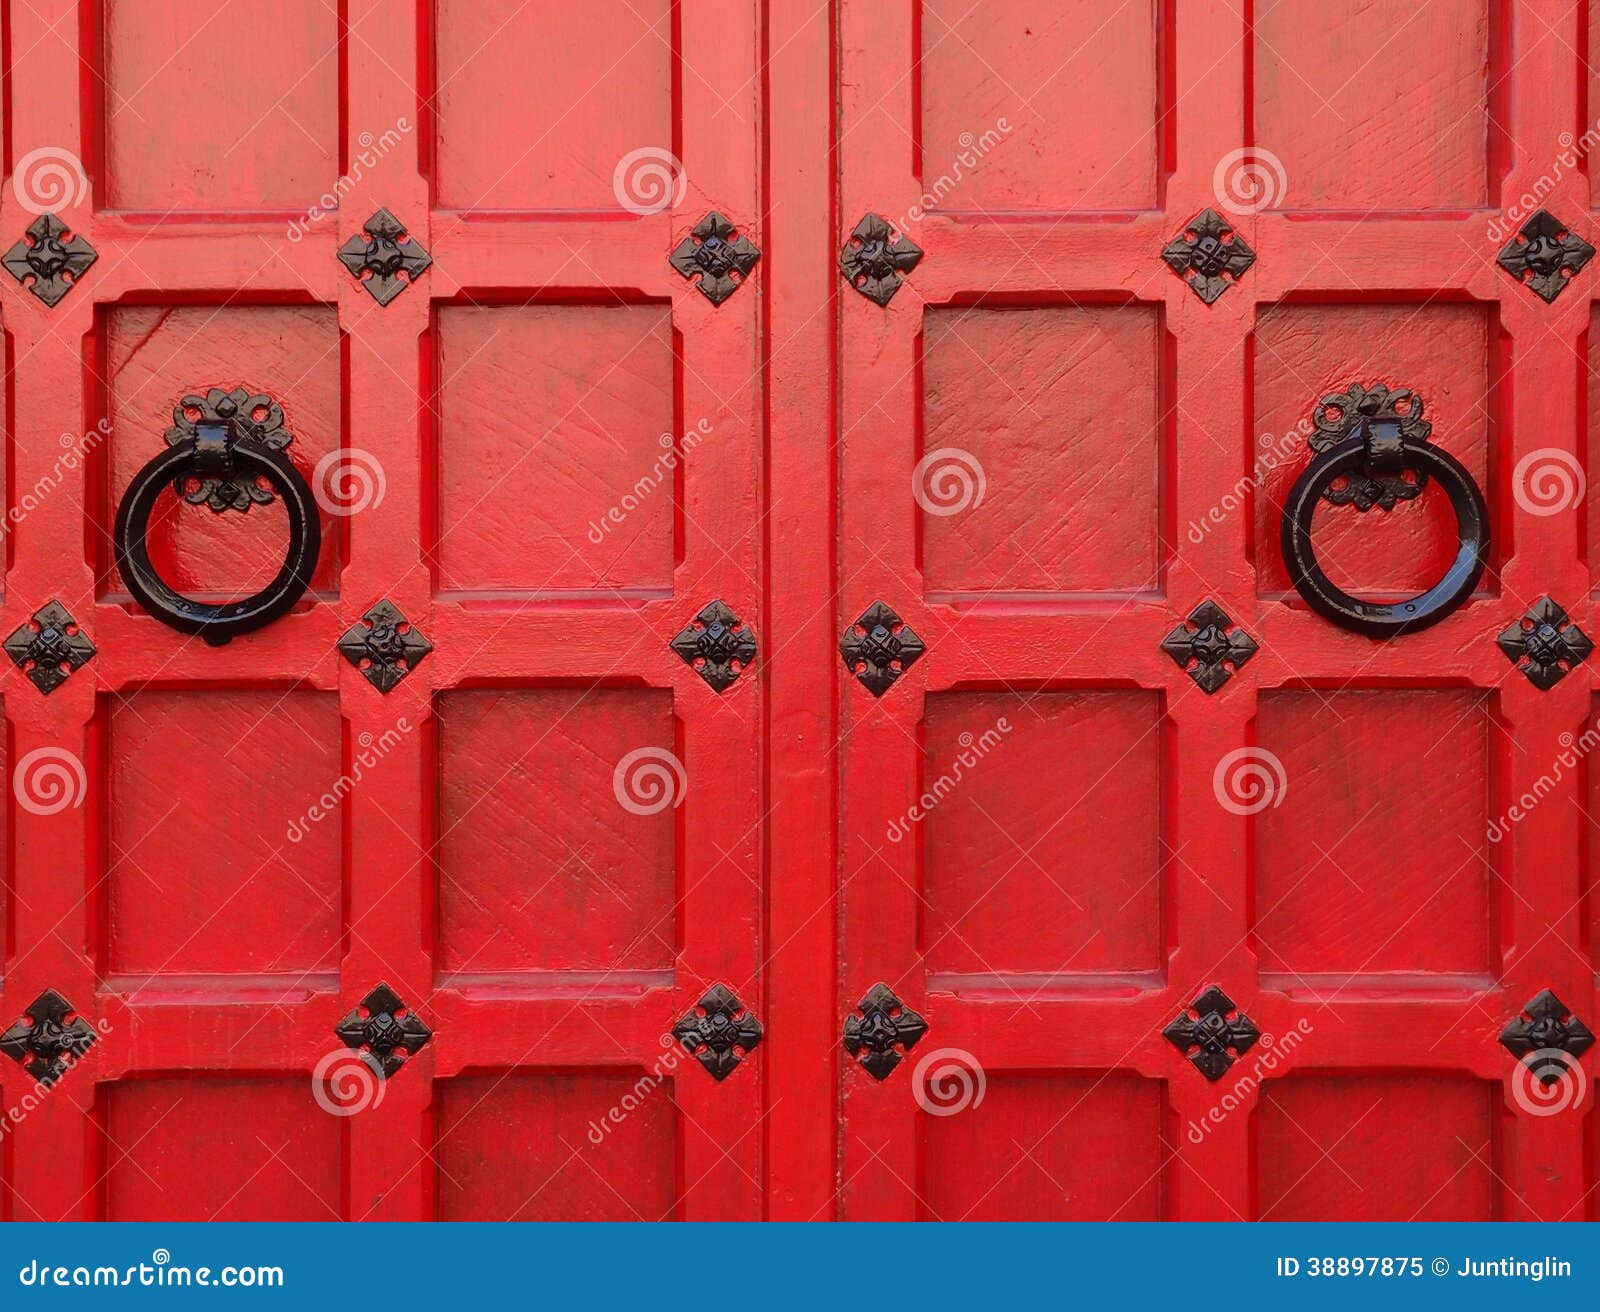 Red Medieval Doors with Black round handles and metal decoration.